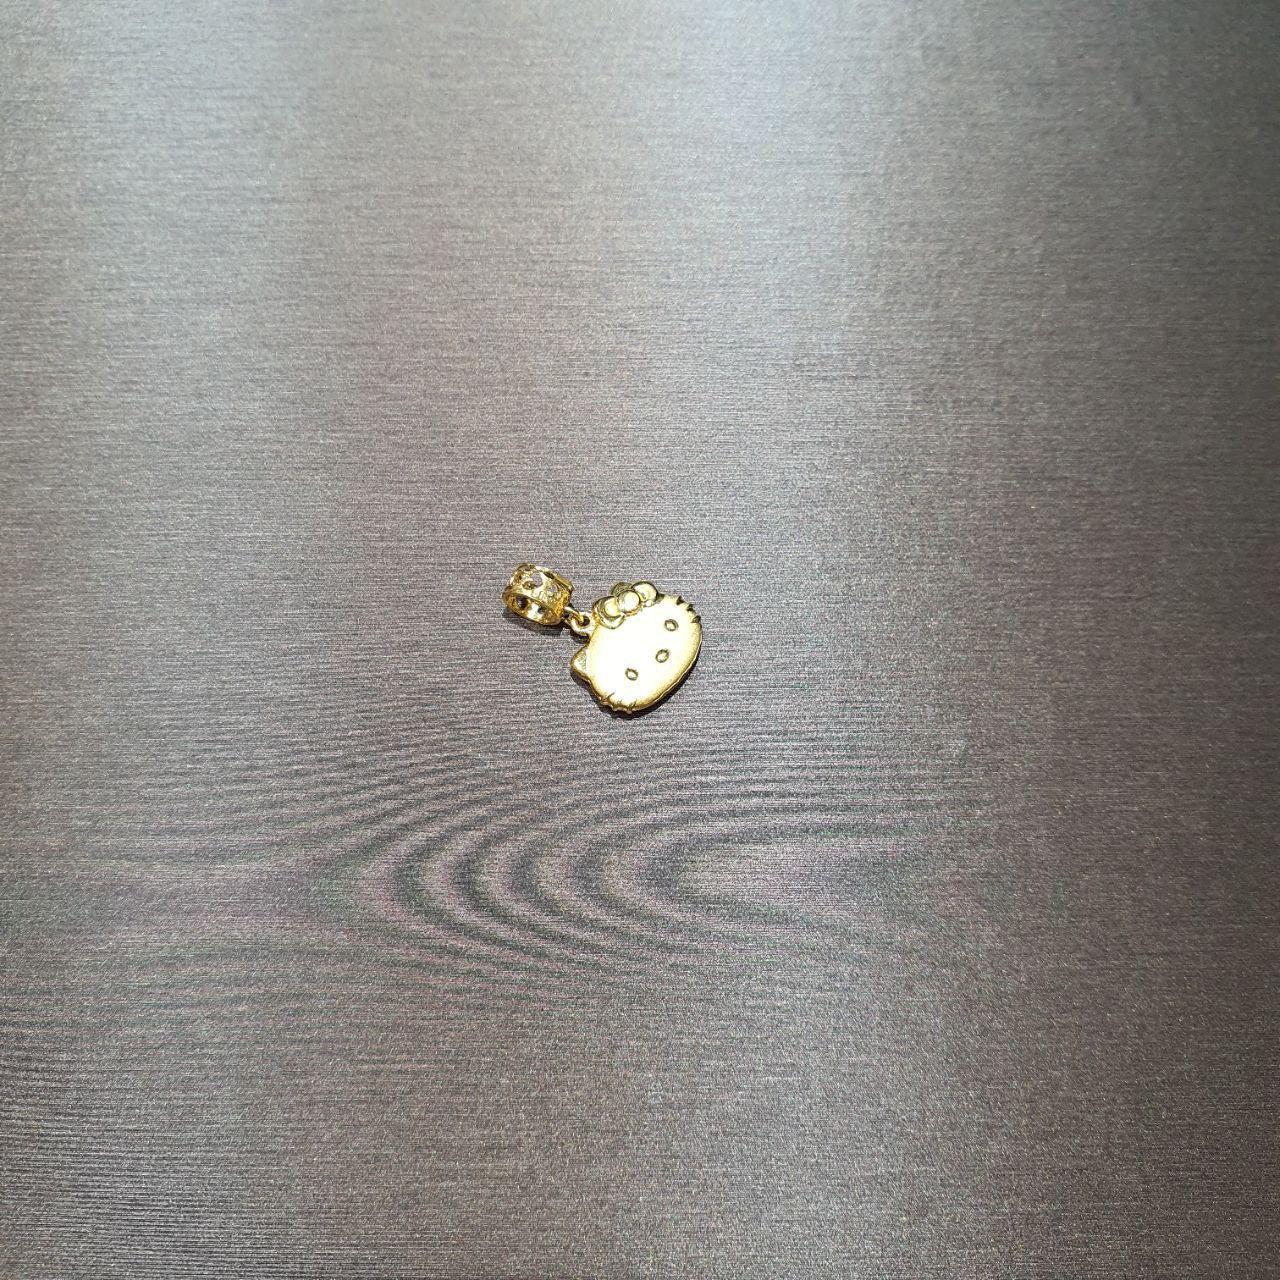 22k / 916 Gold HK Charm and Pendant-Best Gold Shop